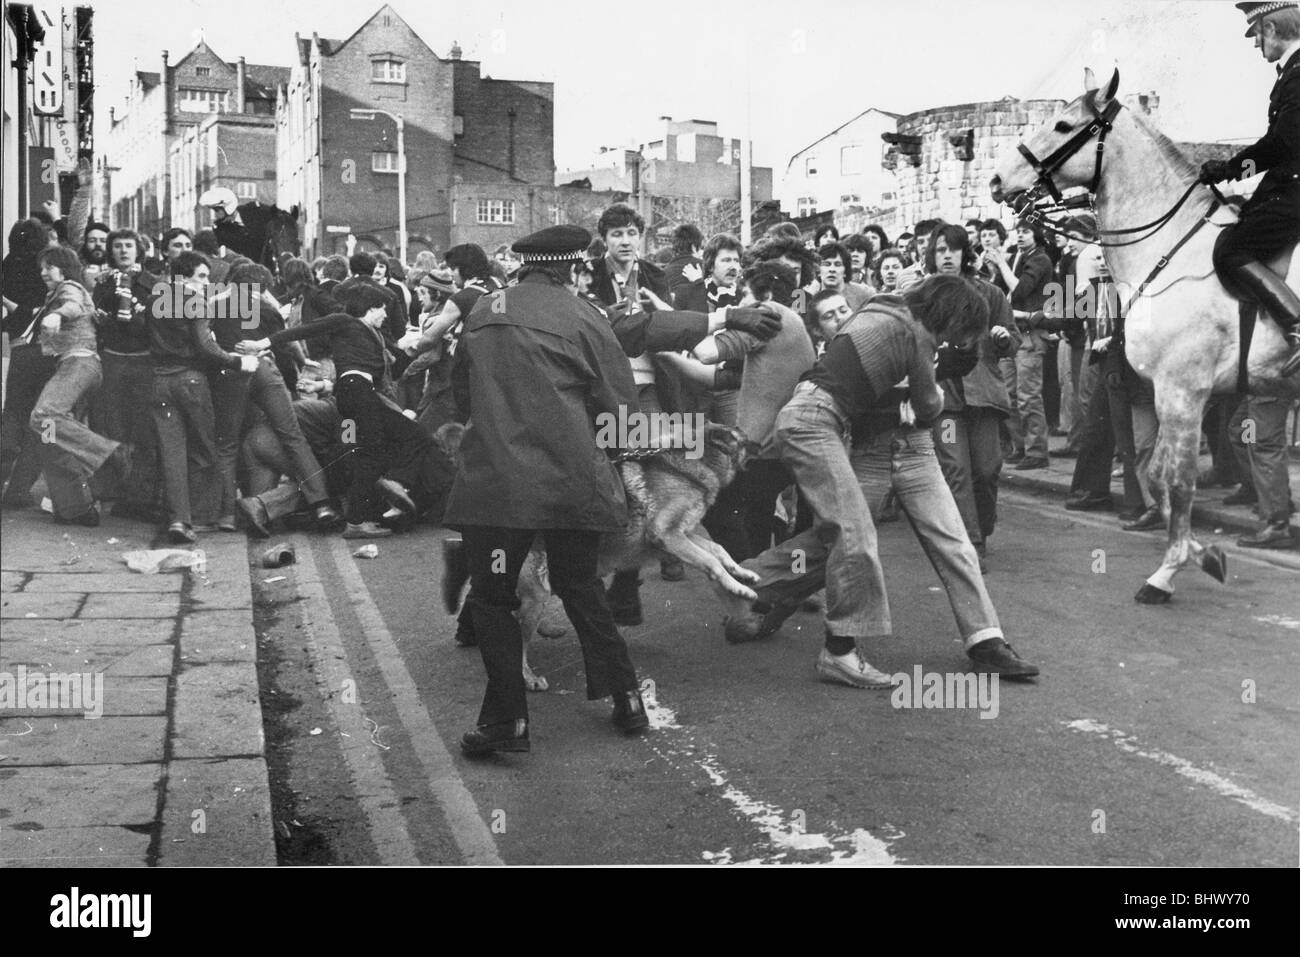 Newcastle United v Sunderland 24 February 1979 - Fans and police clash on Neville Street in Newcastle Trouble on the streets of Stock Photo